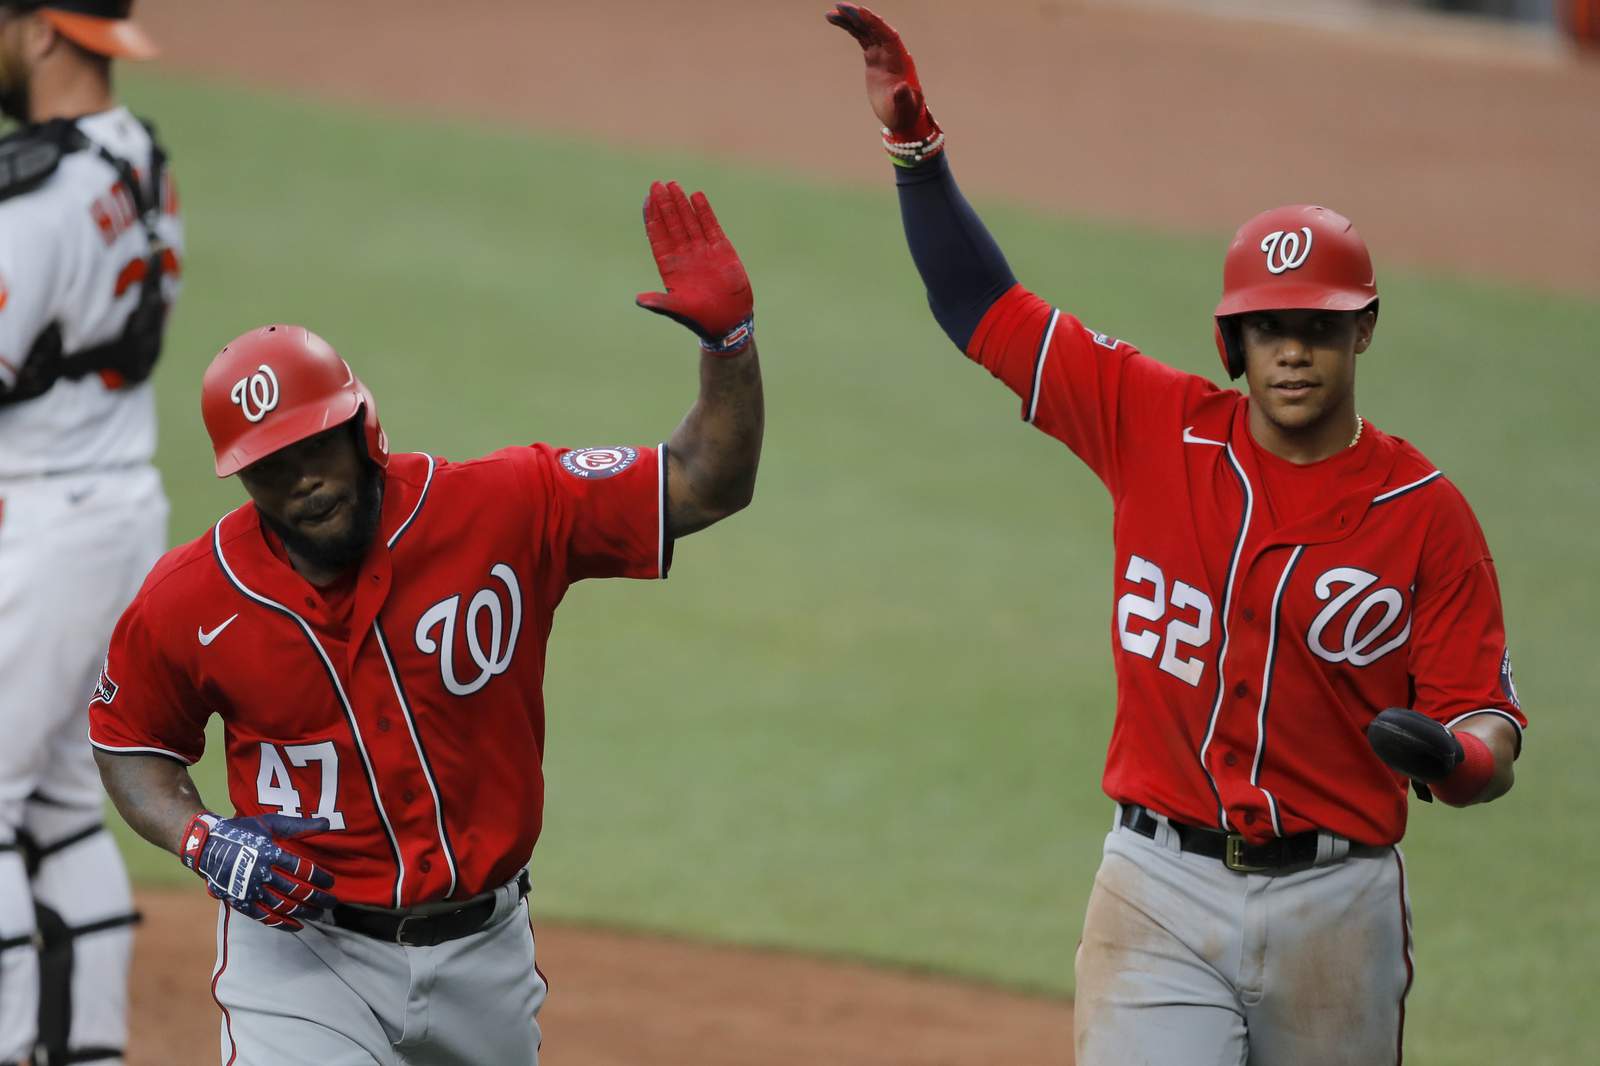 Nats star Juan Soto positive for COVID-19, out for opener